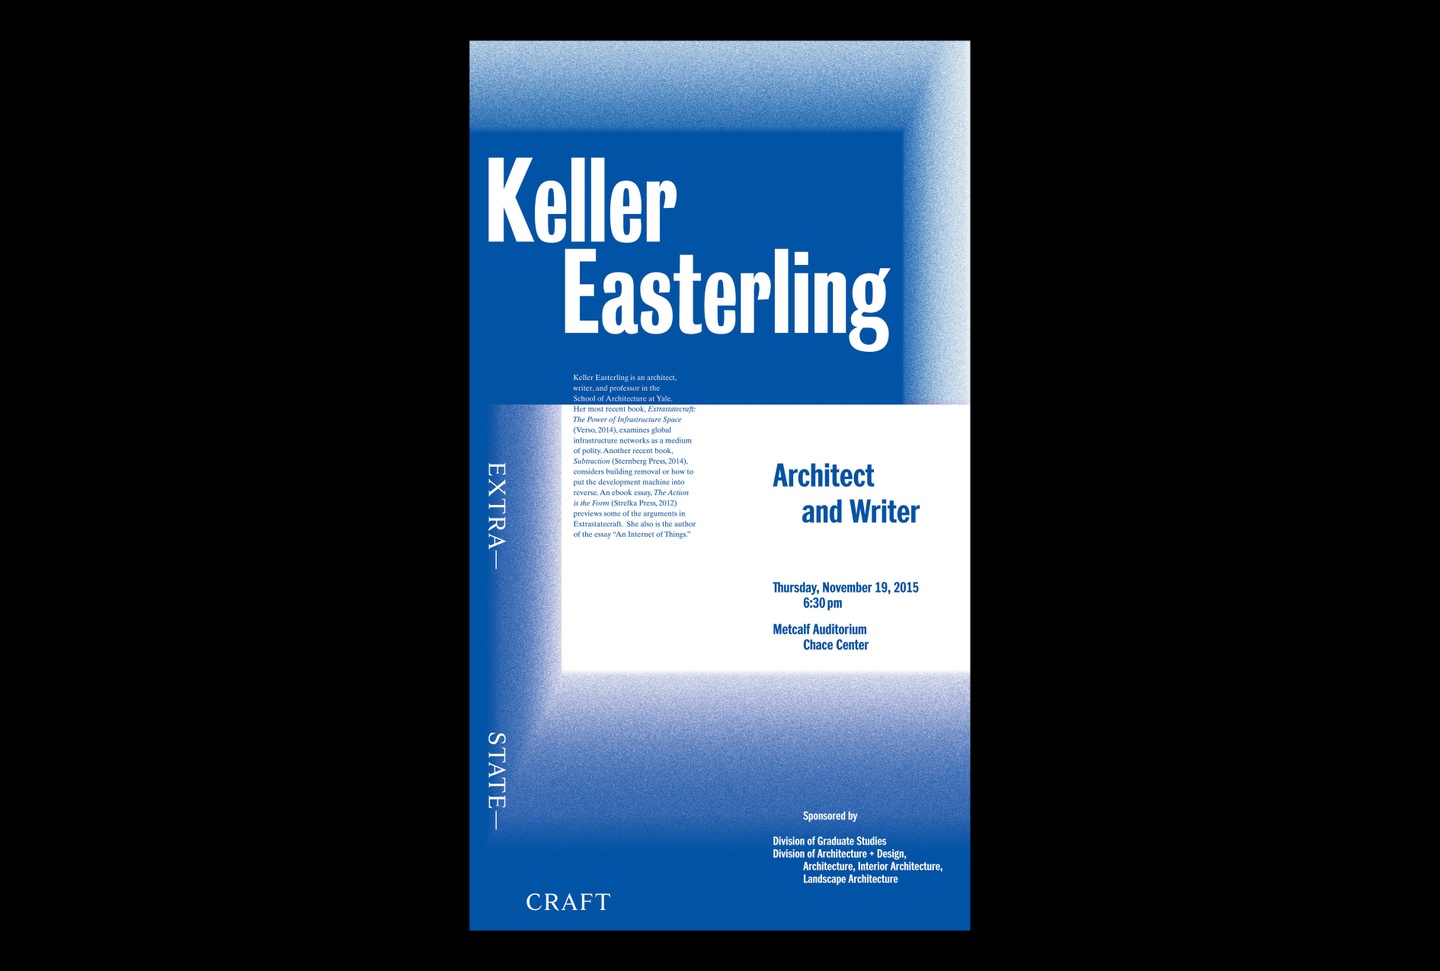 (Cyan) blue and white poster, which contains information about a Keller Easterling lecture: the title set in a bold, tall font with smaller text below. The background consists of an abstract composition of a shape with shadow radiating from the corners in two color ways, inverse images of each other.